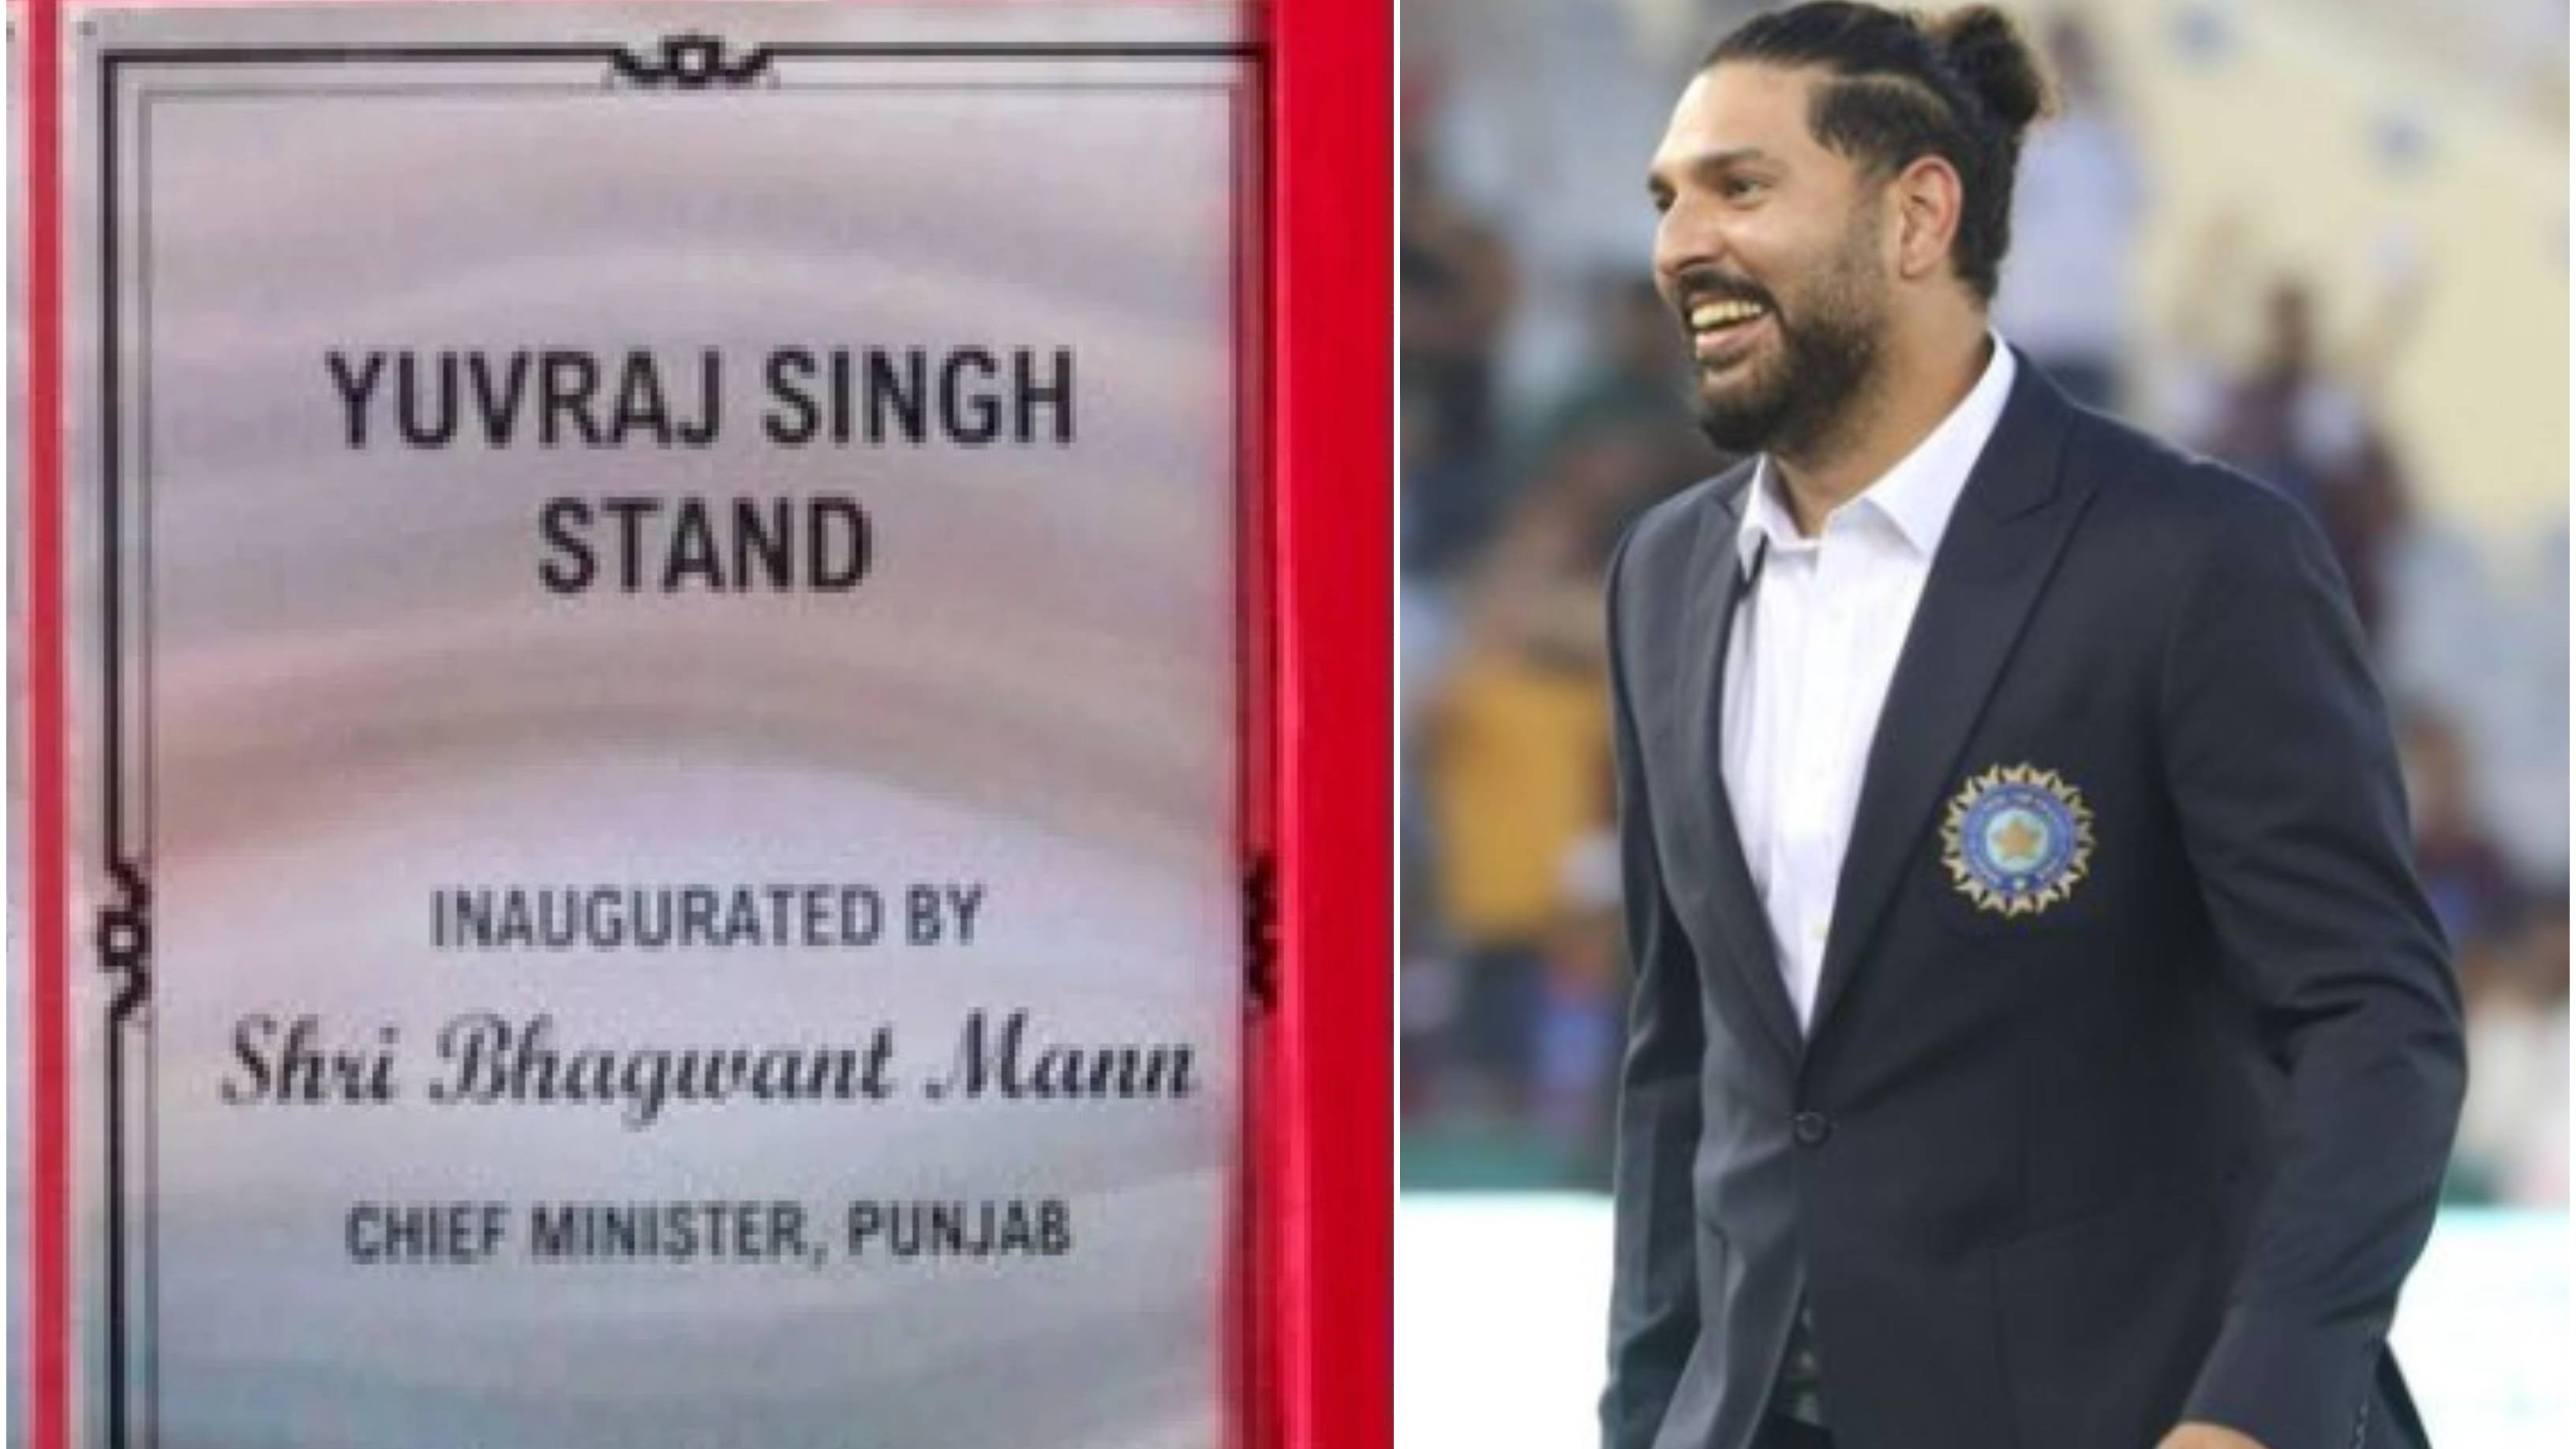 “Even the domestic players should be recognized,” says Yuvraj Singh after being honoured by PCA